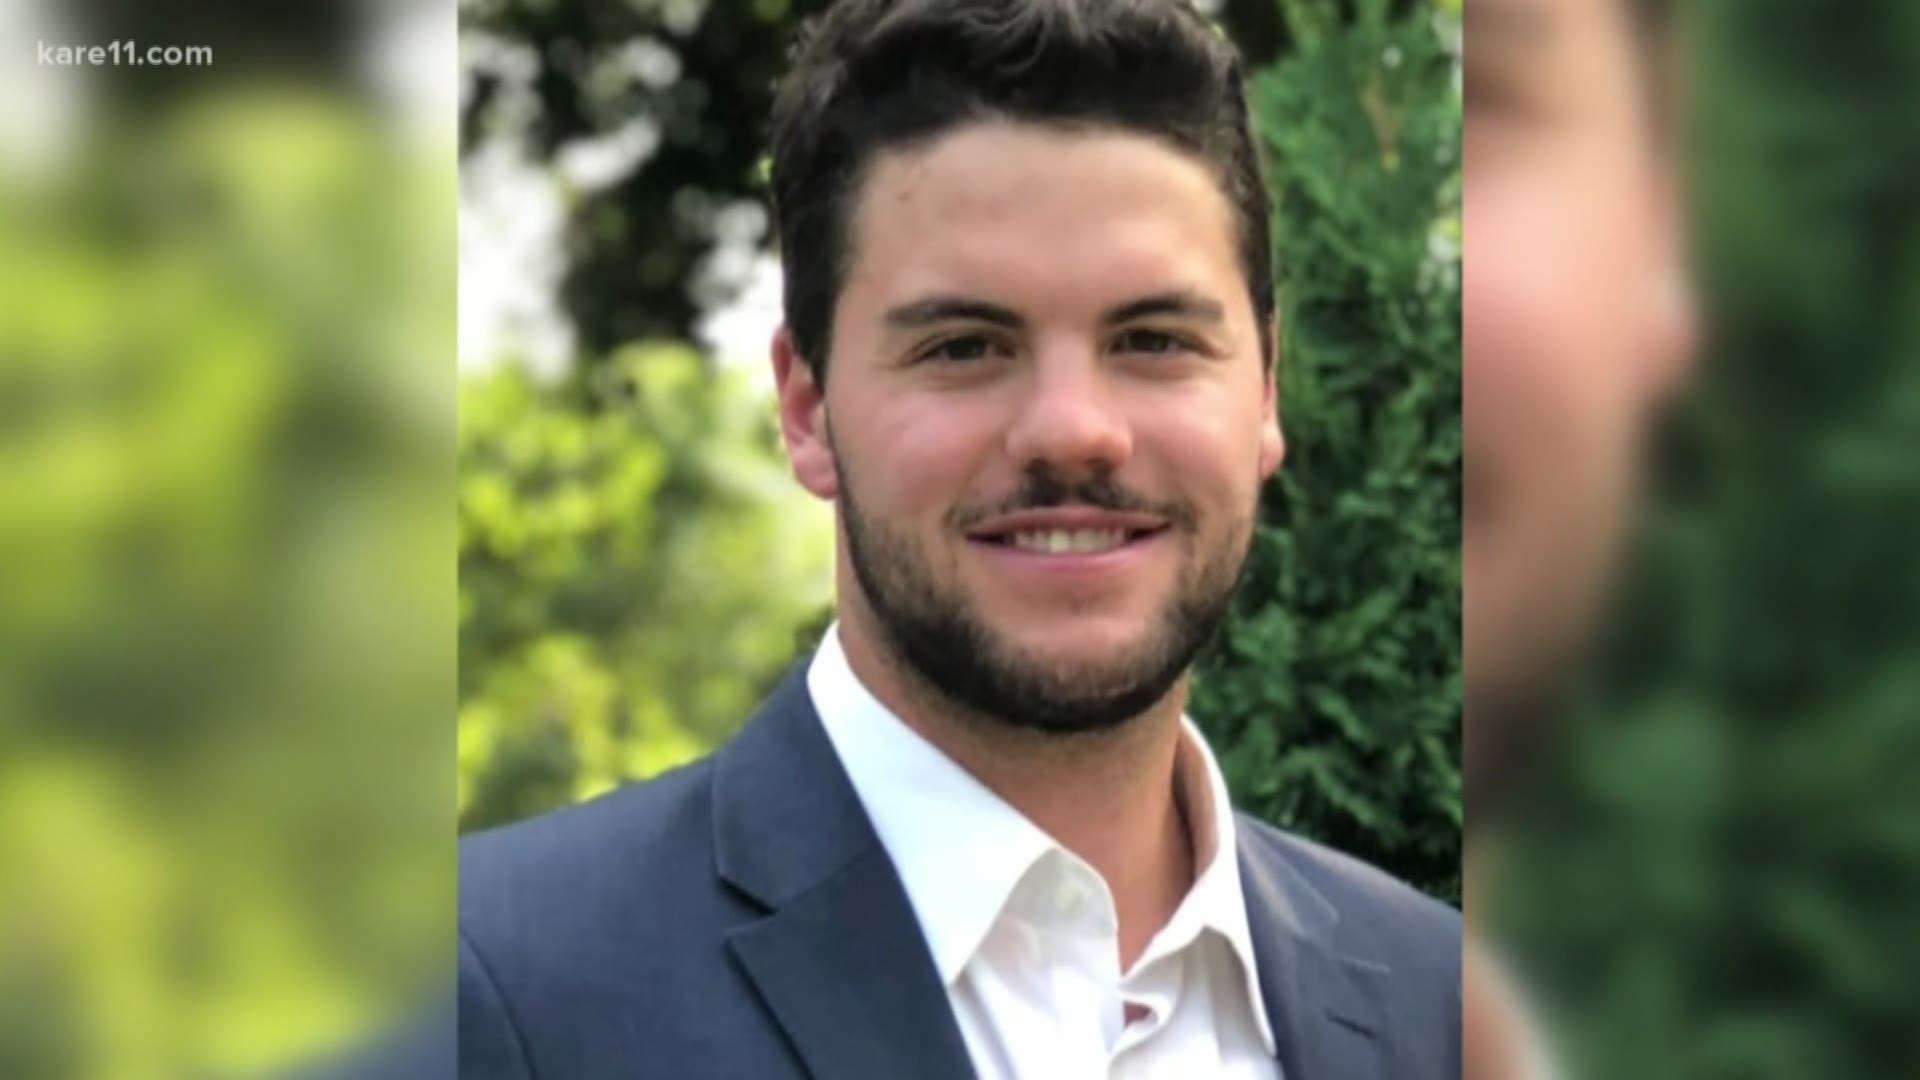 Friends of Chris White say they last saw their friend early Saturday morning after he left their rental property near the Colorado River. The group was in Texas for the Austin City Limits Festival. https://kare11.tv/2RzuVTG